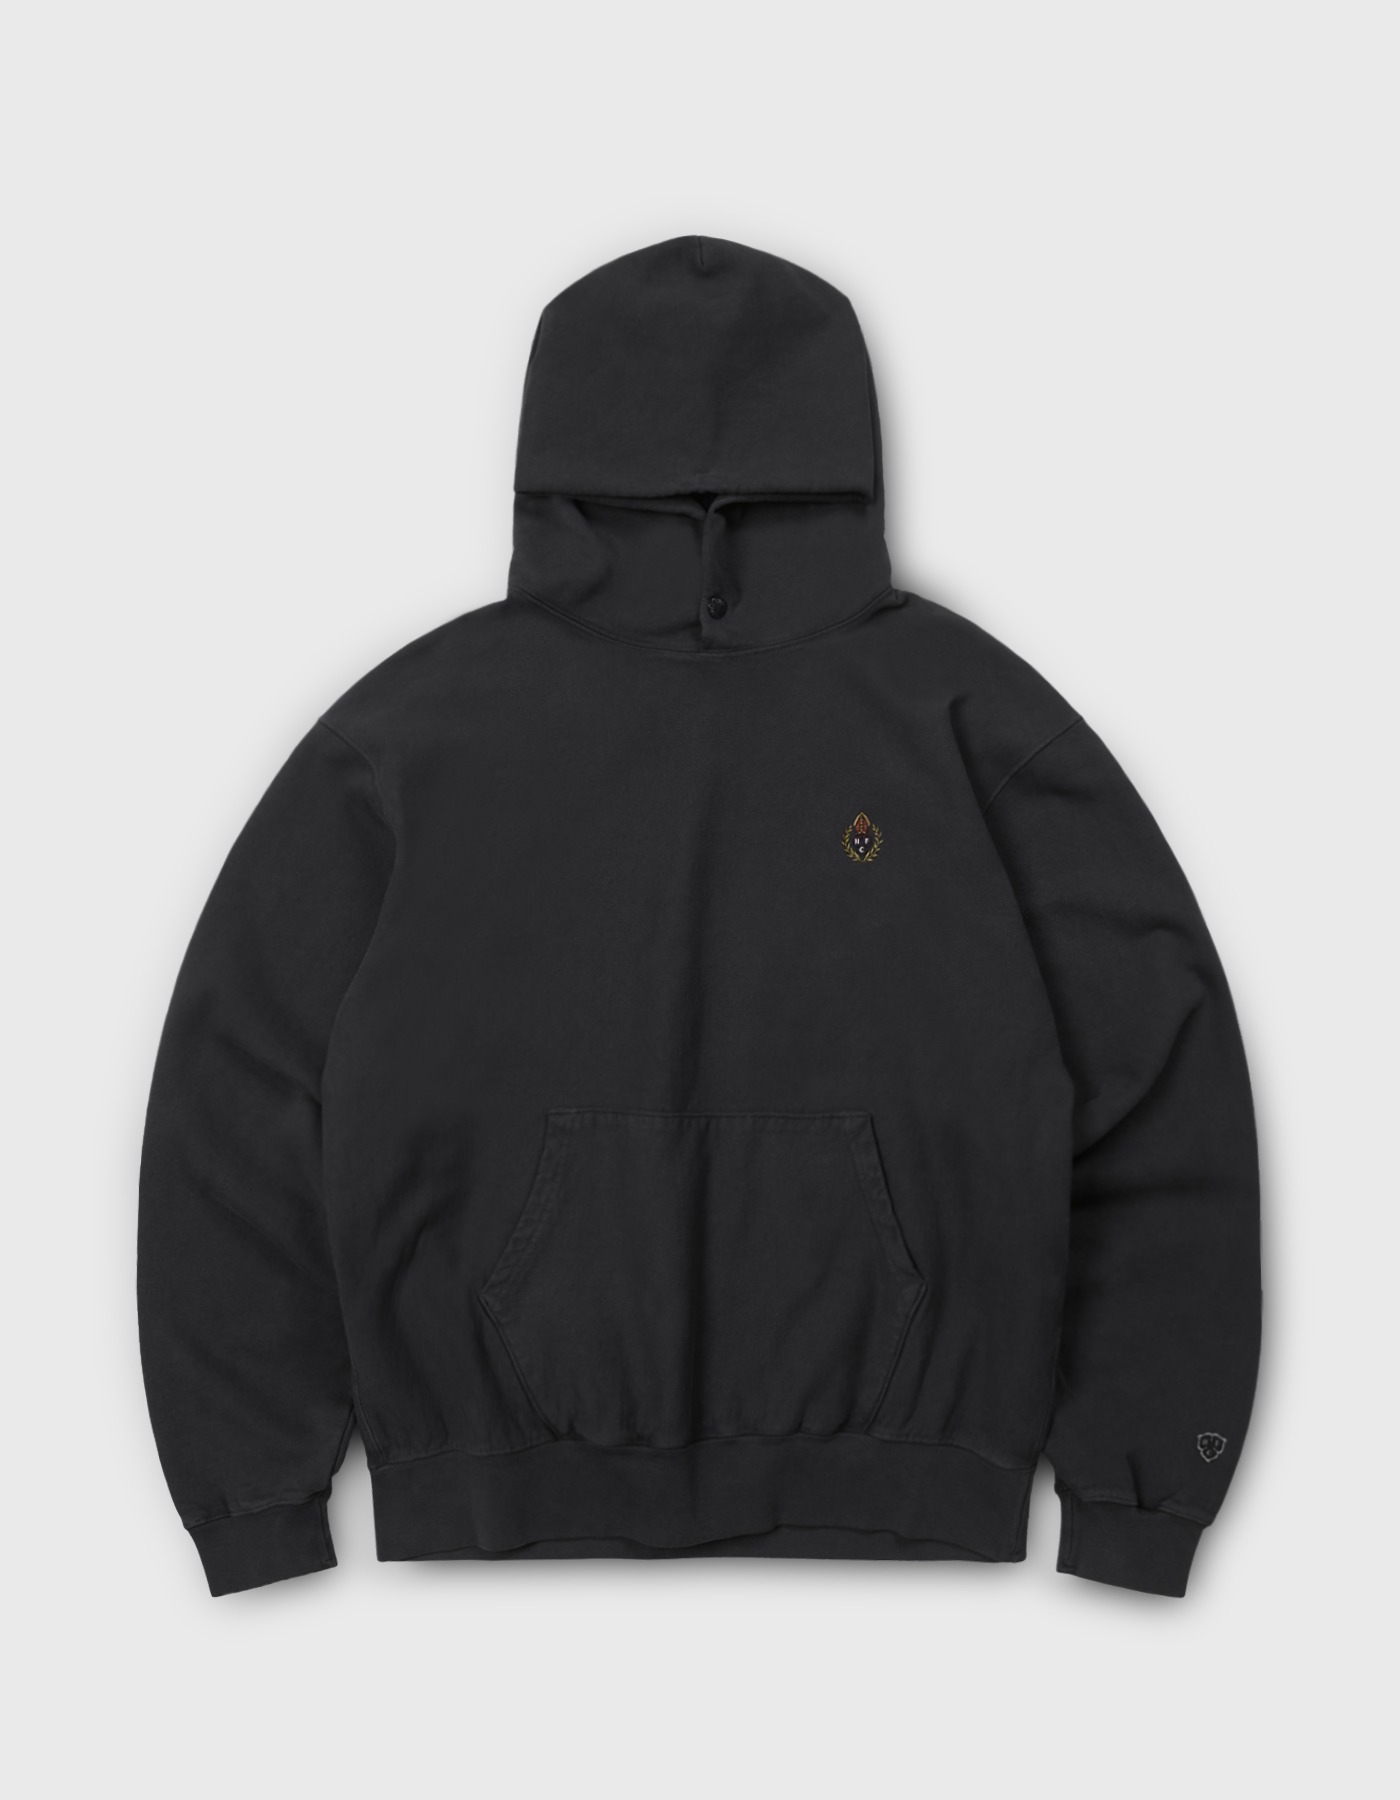 HFC CREST GYM HOODIE / Charcoal